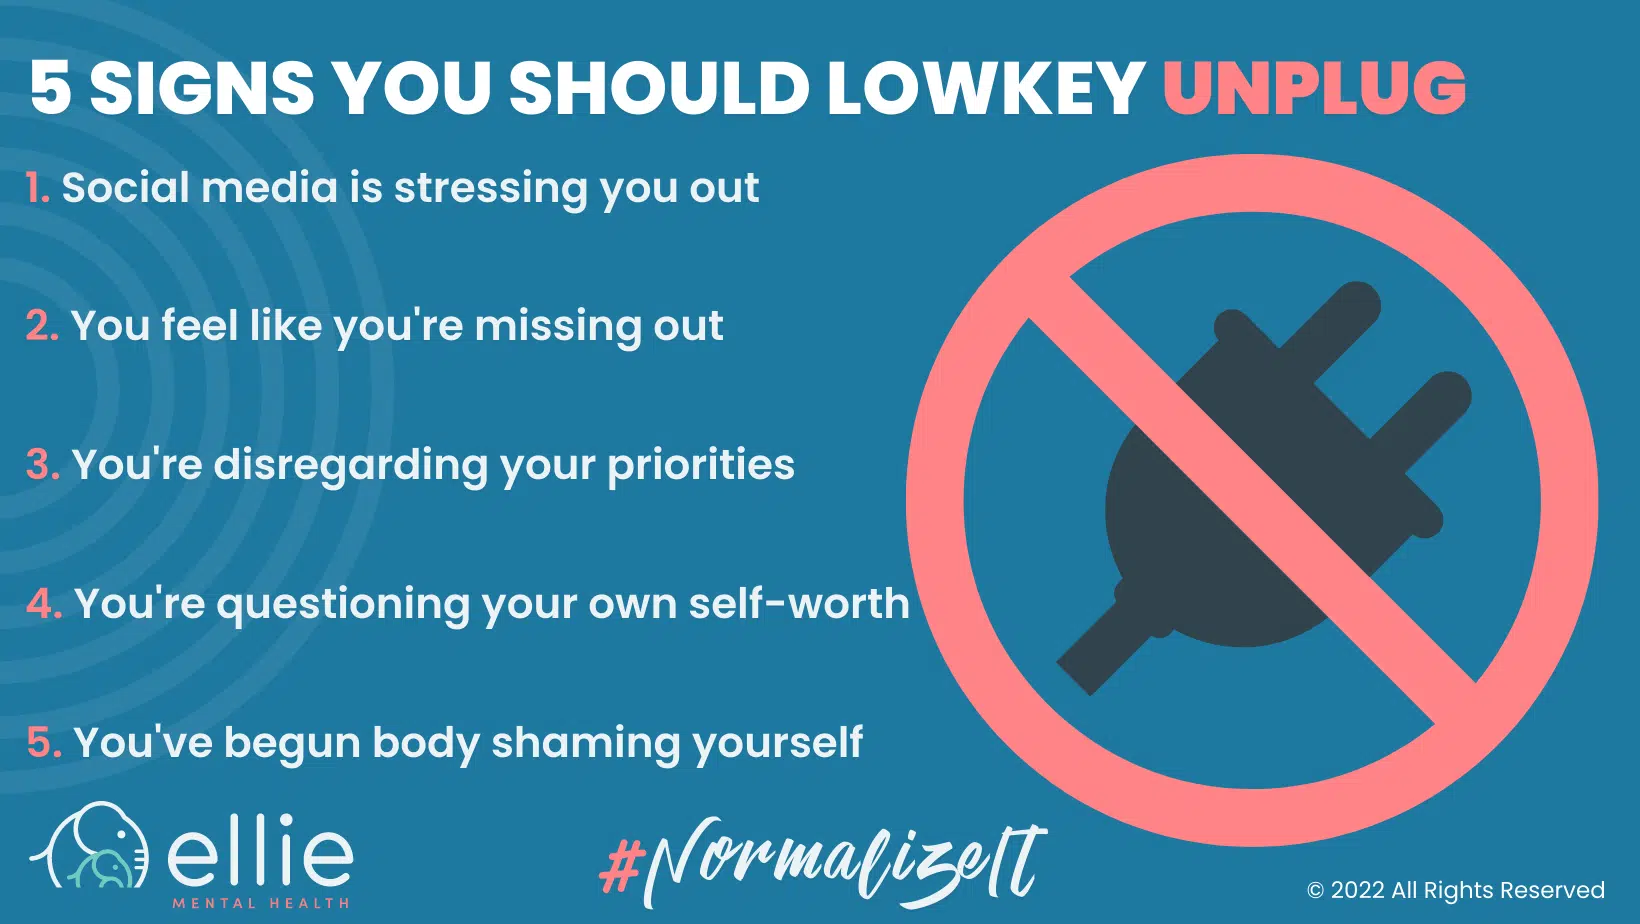 5 Signs You Should Lowkey Unplug Infographic